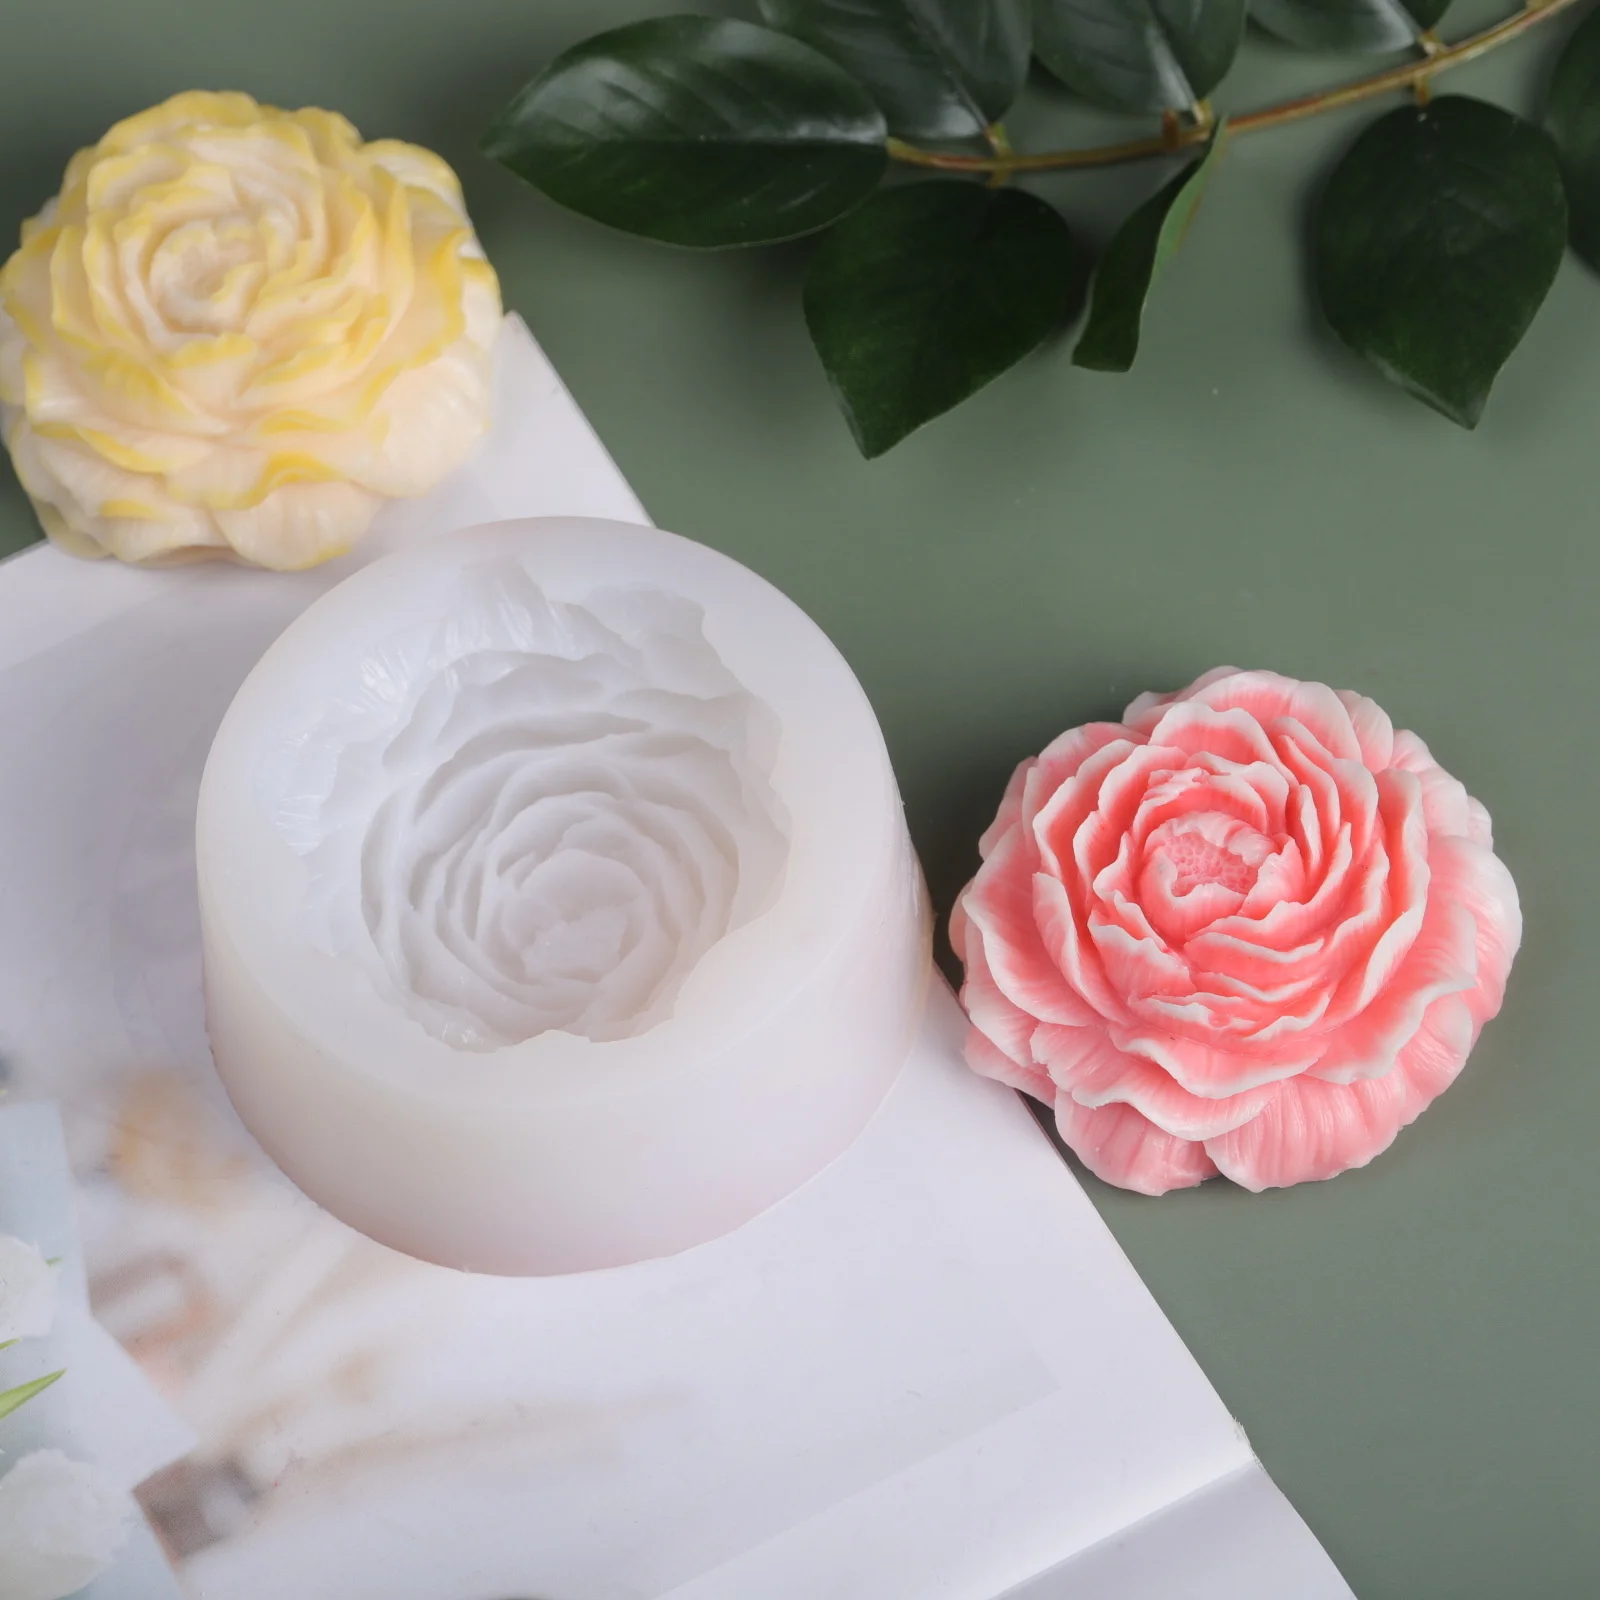 Big Peony Aromatic Candle Jars Supplies Mold DIY Hand Soap Baked Cake Decorative Flowers Silicone Resin Molds Handmade Gypsum